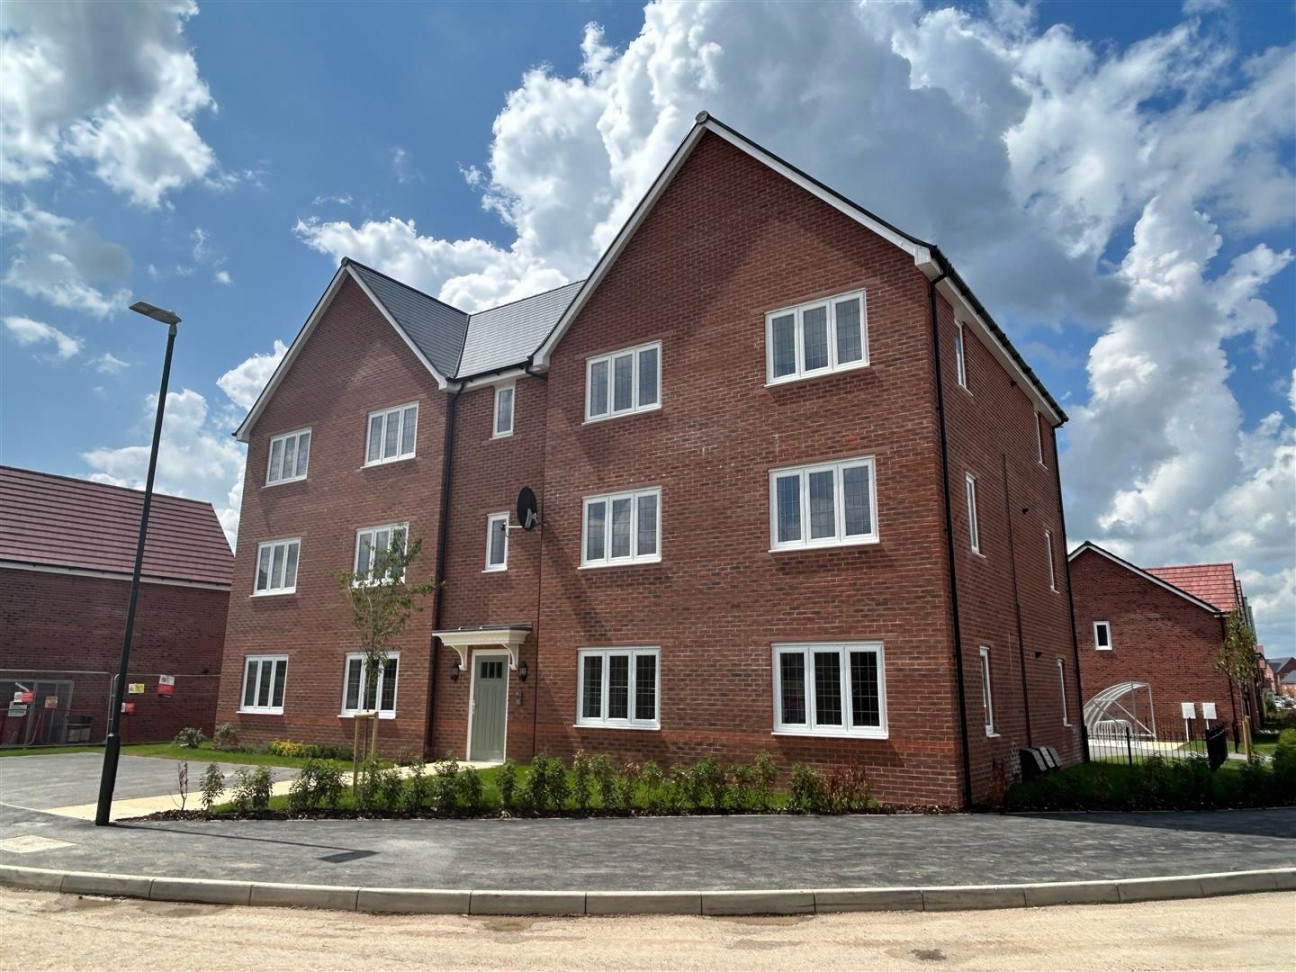 2 bed apartments, Twigworth Green, Gloucester Shared Ownership